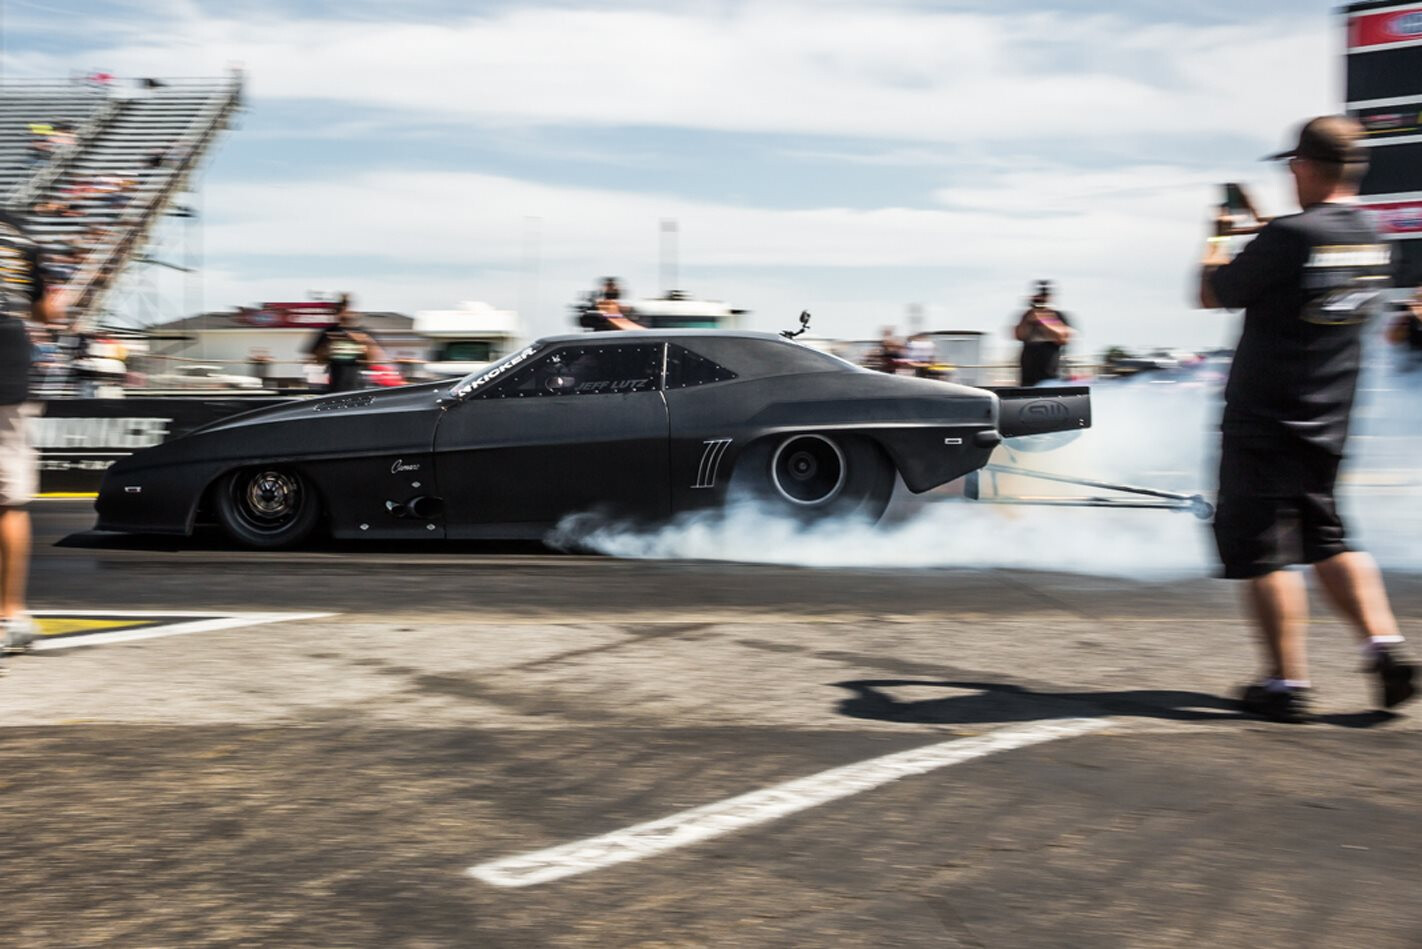 JEFF LUTZ RUNS LOWS SIXES AT EVERY TRACK ON HOT ROD DRAG WEEK – VIDEO